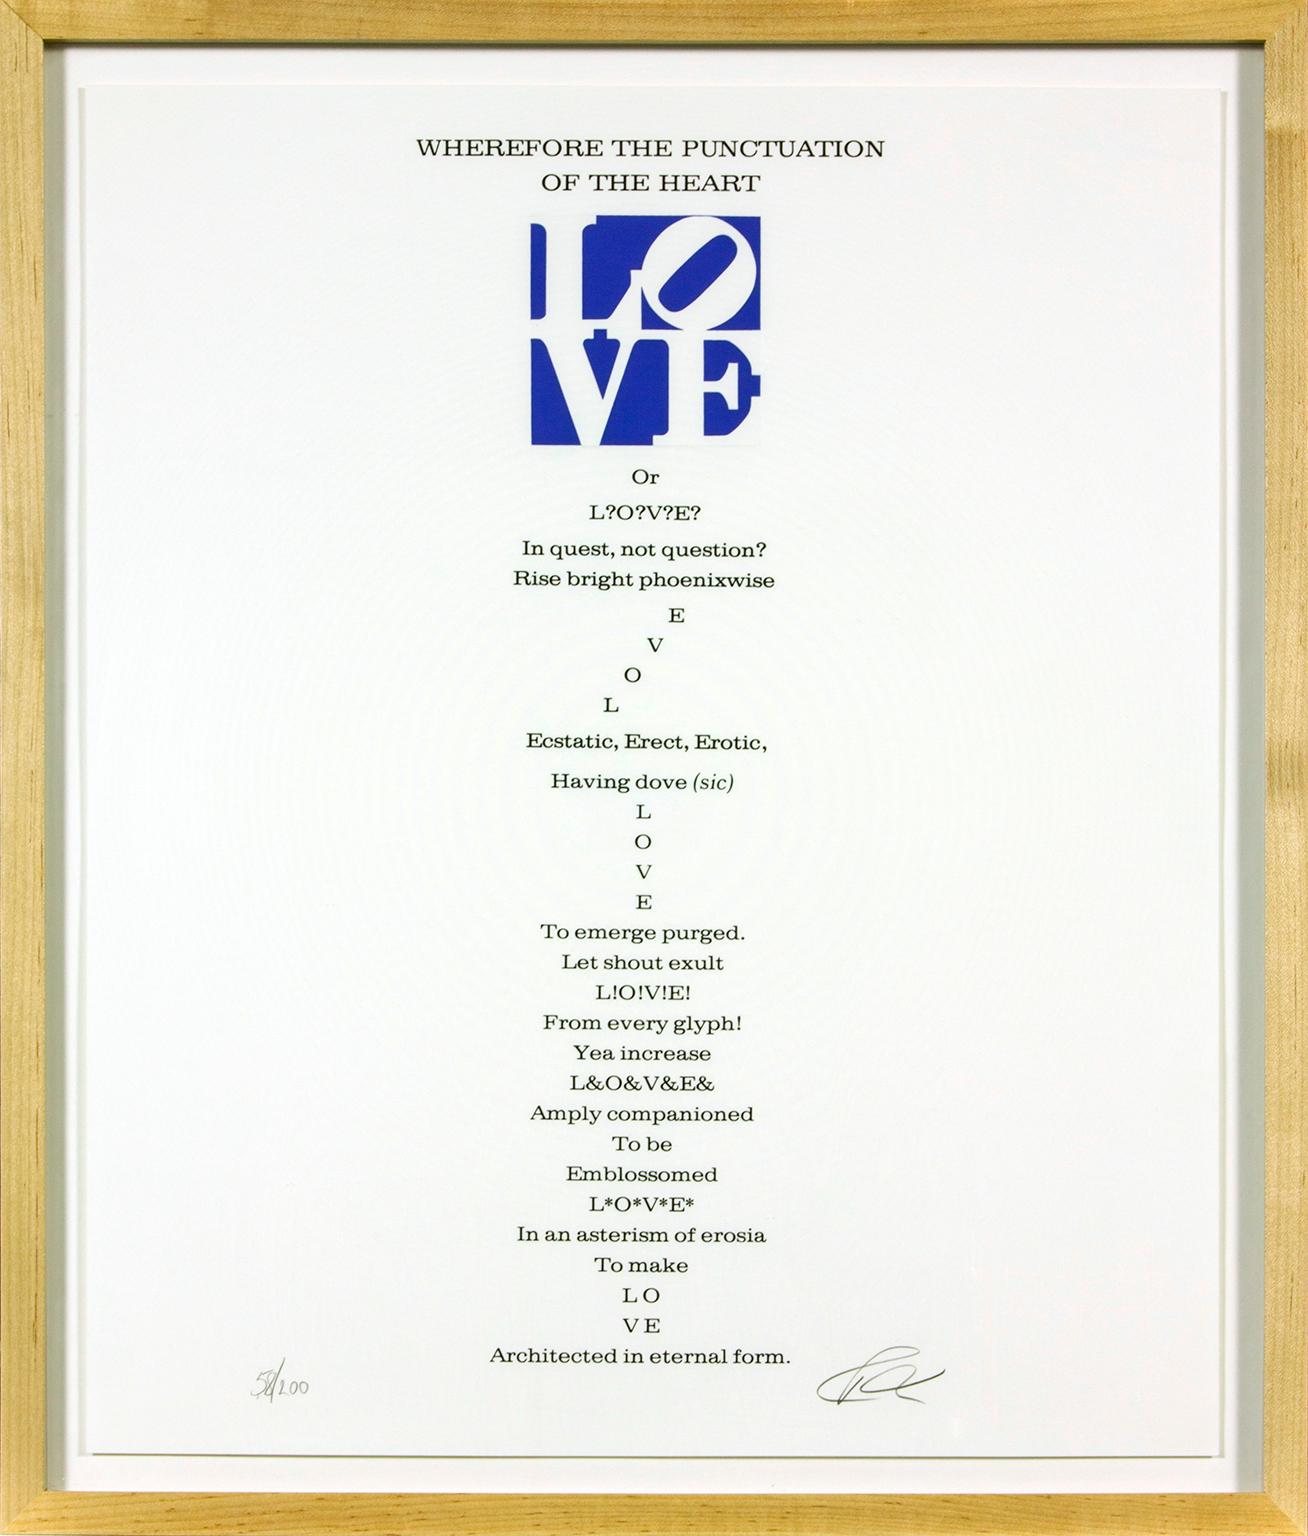 "Wherefore the Punctuation (Book of LOVE" silkscreen print from a portfolio of 12 original poems and 12 original prints by artist Robert Indiana. Edition number 58 of 200. The prints in the portfolio were created by Indiana as illustrations for his